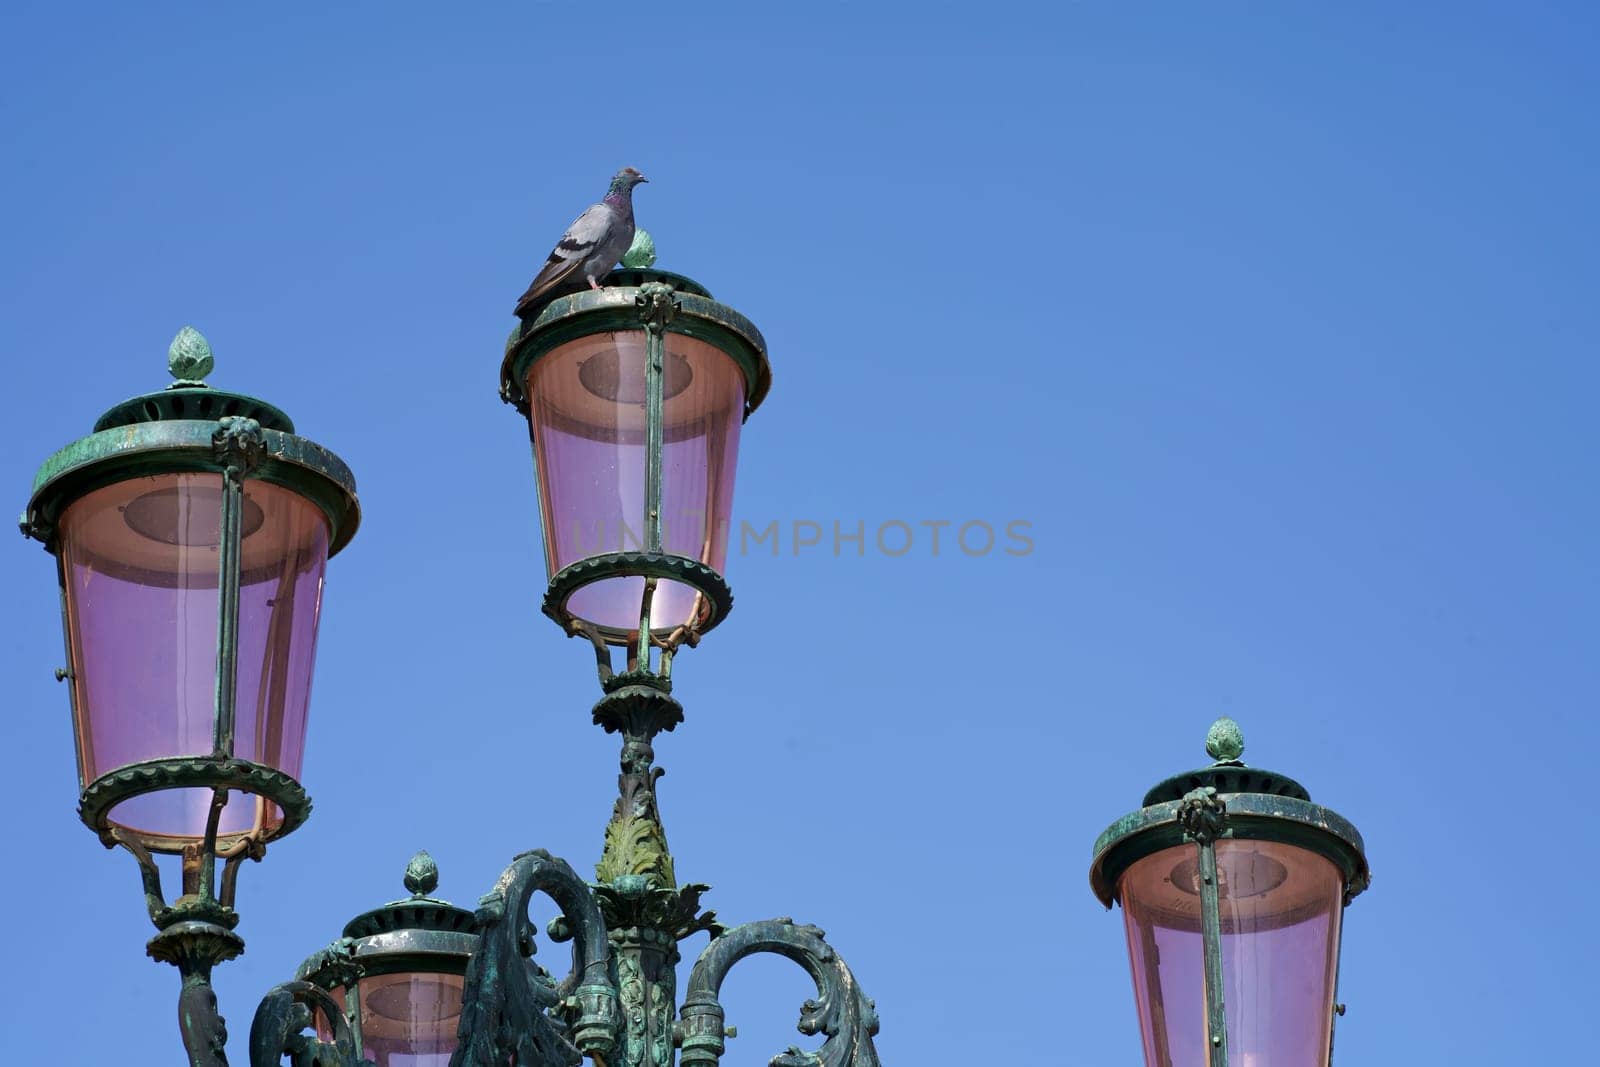 Lantern on the street of Venice. Pink lights of Venice. Four lamps with pink glass are on an ornate black metal lamp post